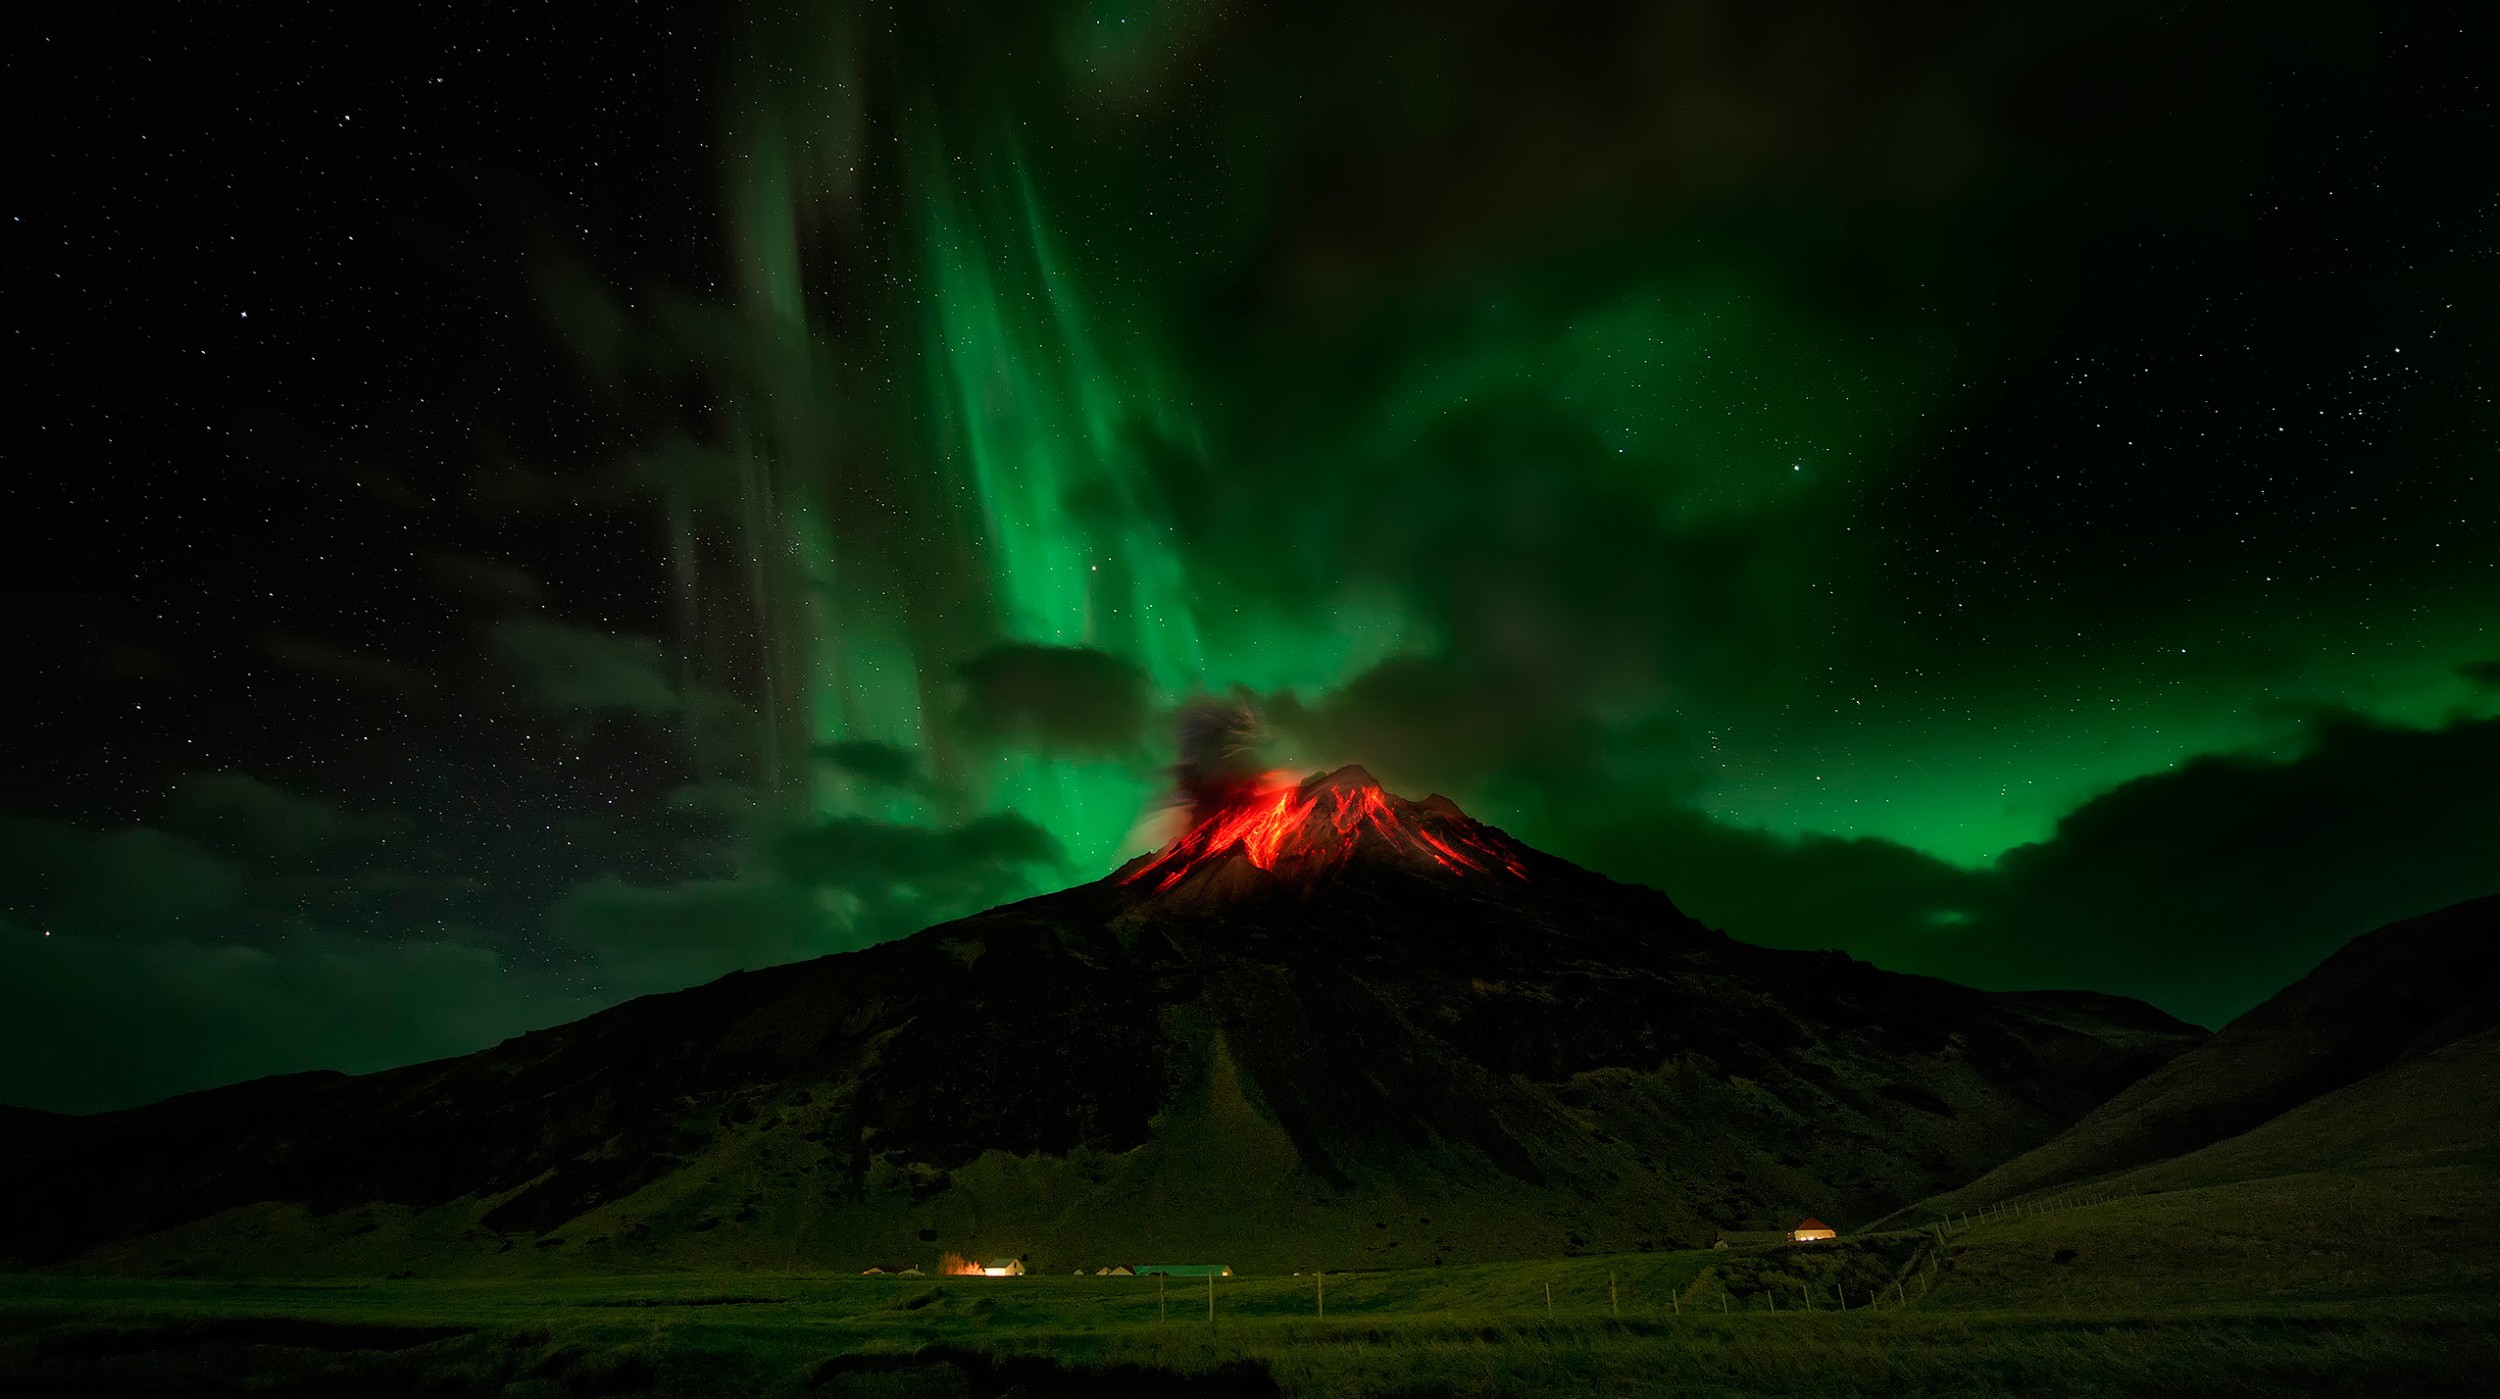 General 2500x1399 nature night landscape stars long exposure lava volcano clouds lights mountains aurorae